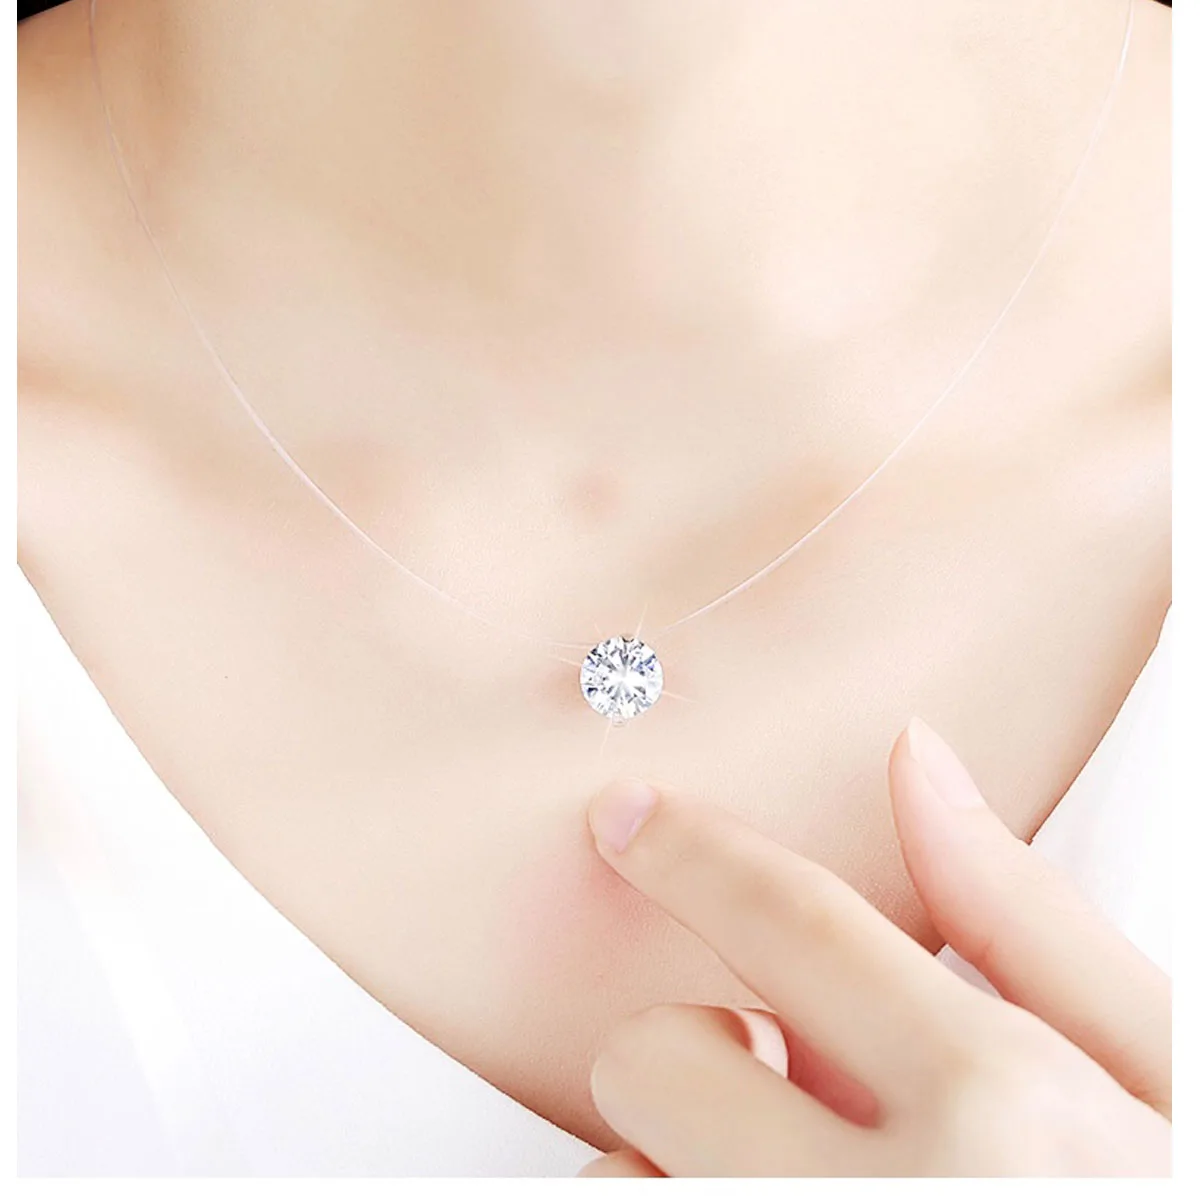 

Hot Sale Teardrop Pendant Necklace 2018 Transparent Fishing Line Jewelry Necklace Clavicle Invisible Woman Pendant Necklace